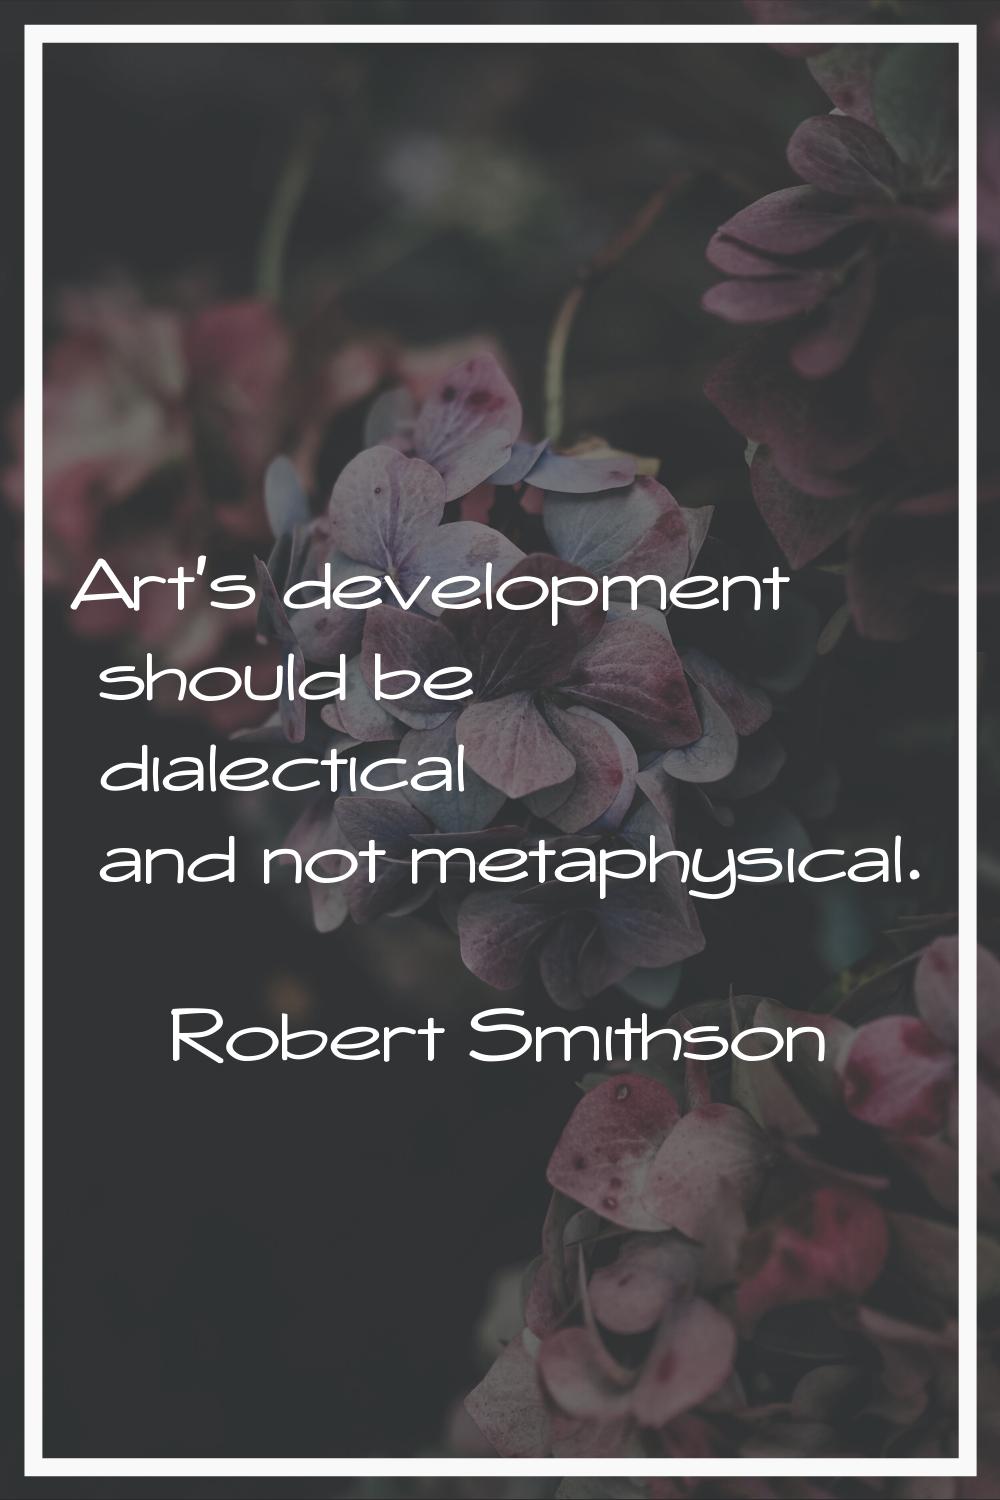 Art's development should be dialectical and not metaphysical.